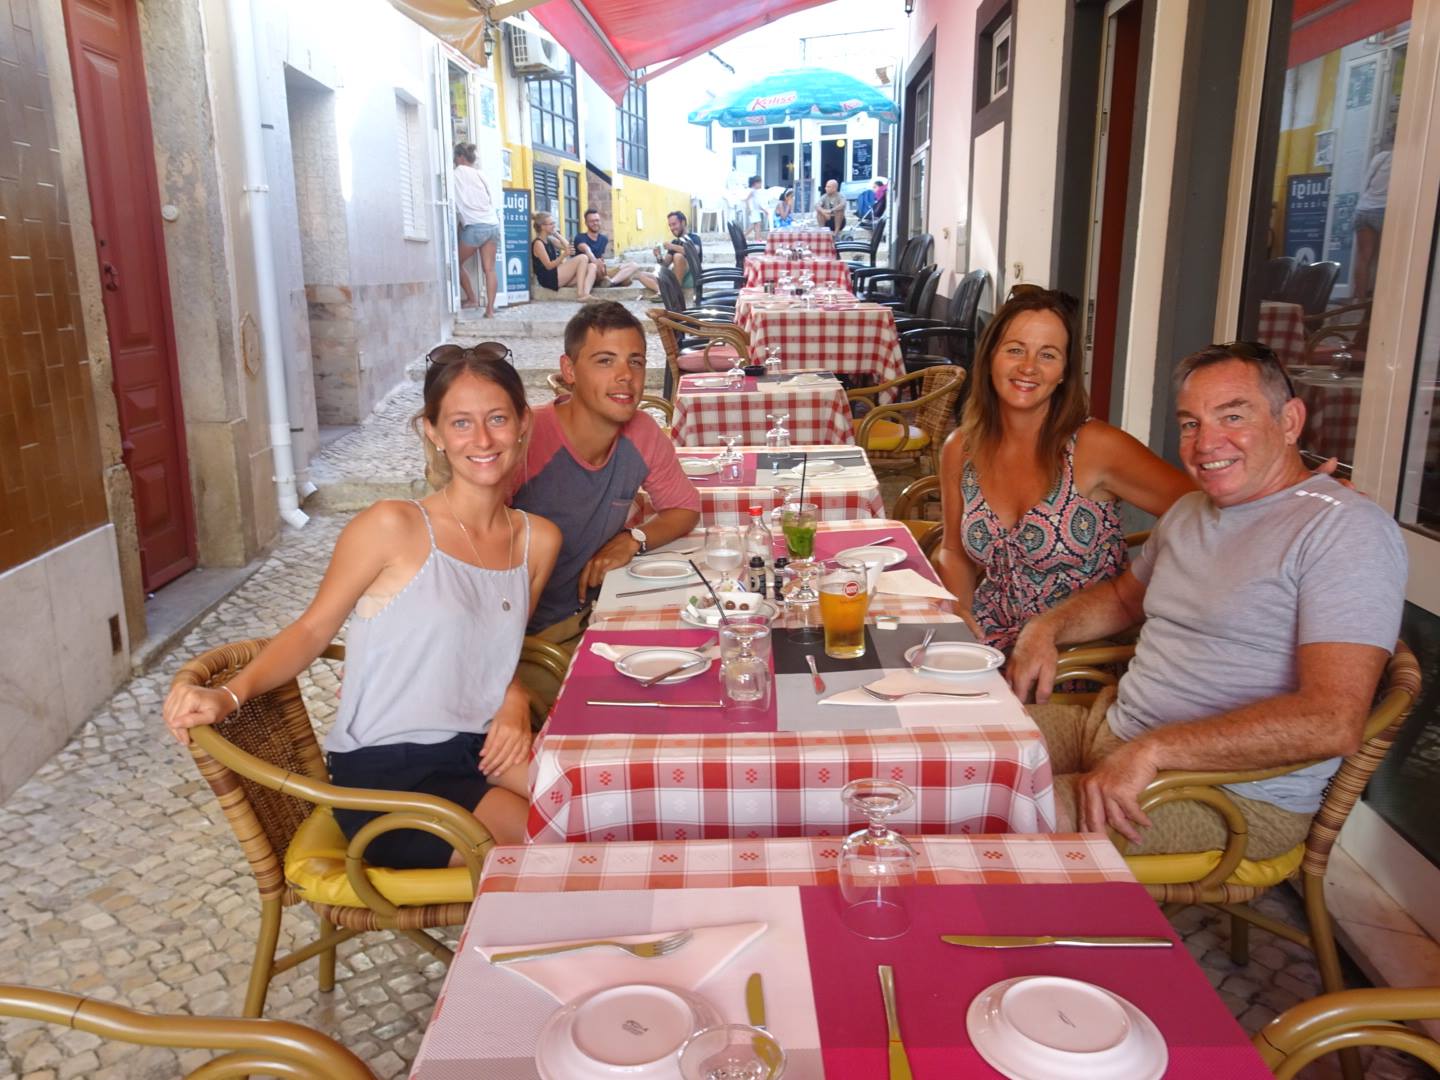 Lyle, Leanne, Cody and Tahlia in Lagos, Portugal